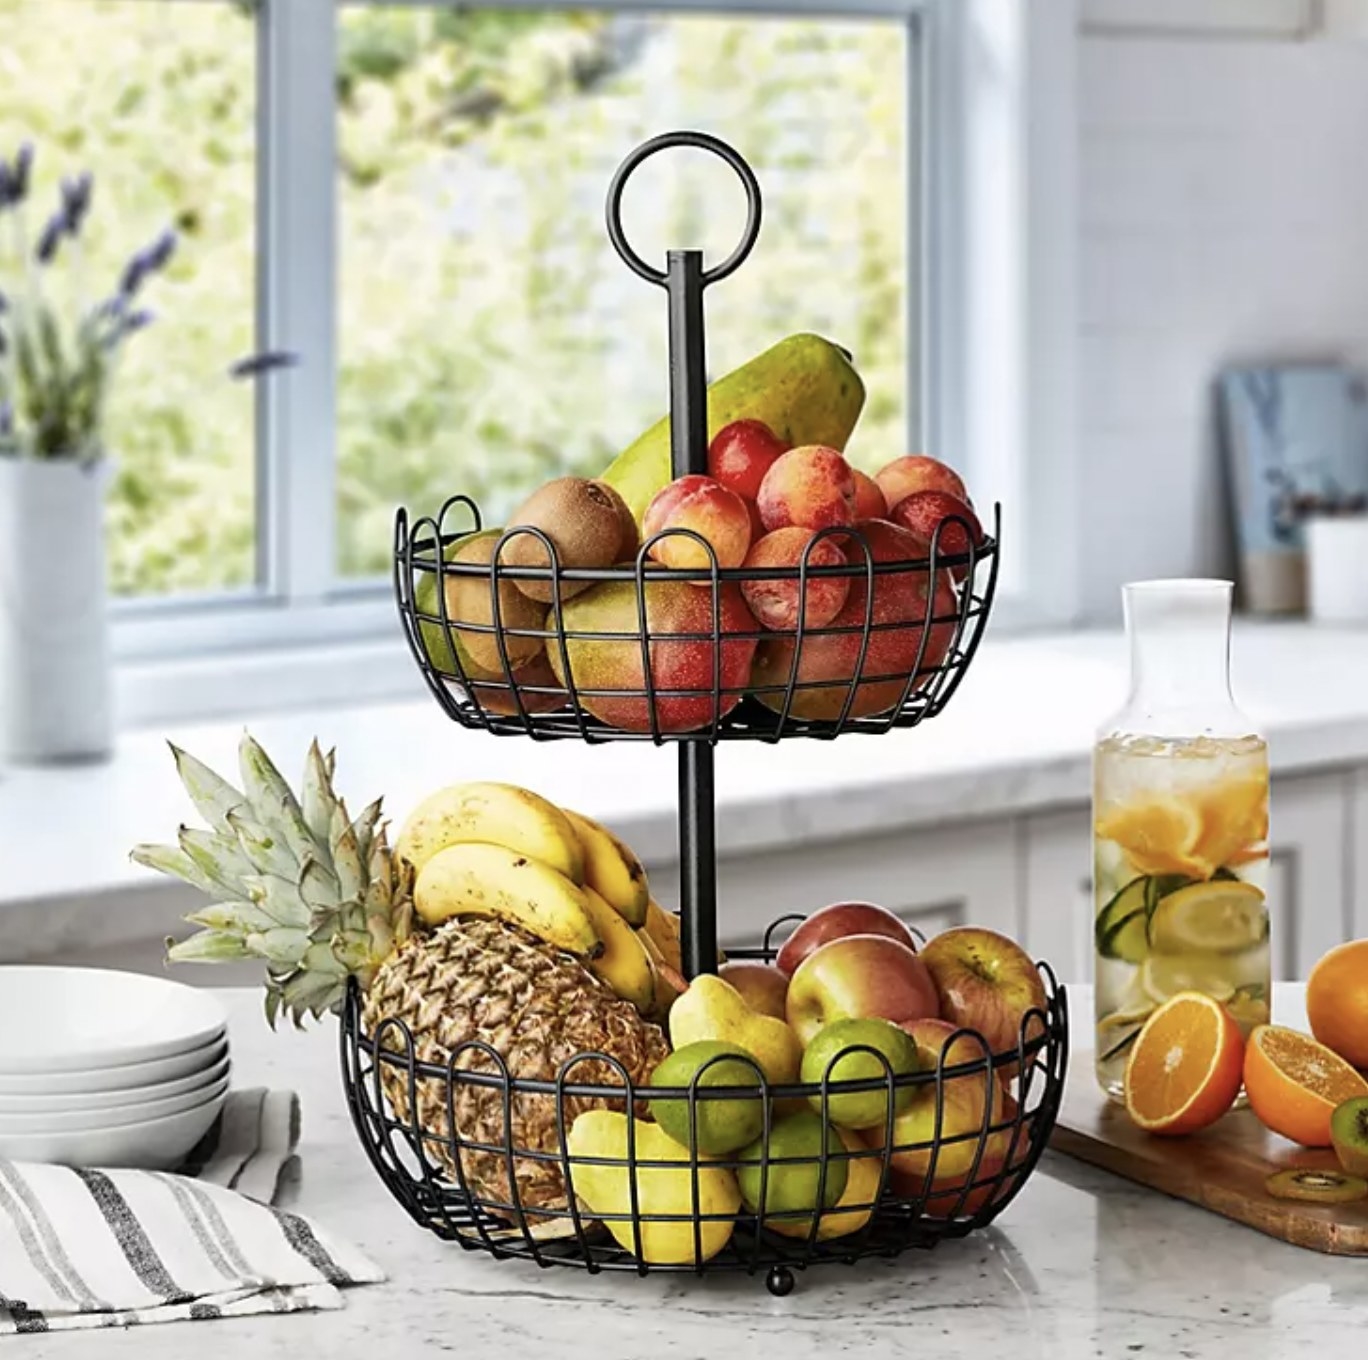 The fruit stand with pineapple, bananas, pears, and apples in larger bottom basket and plums, kiwis, and mangoes in top basket